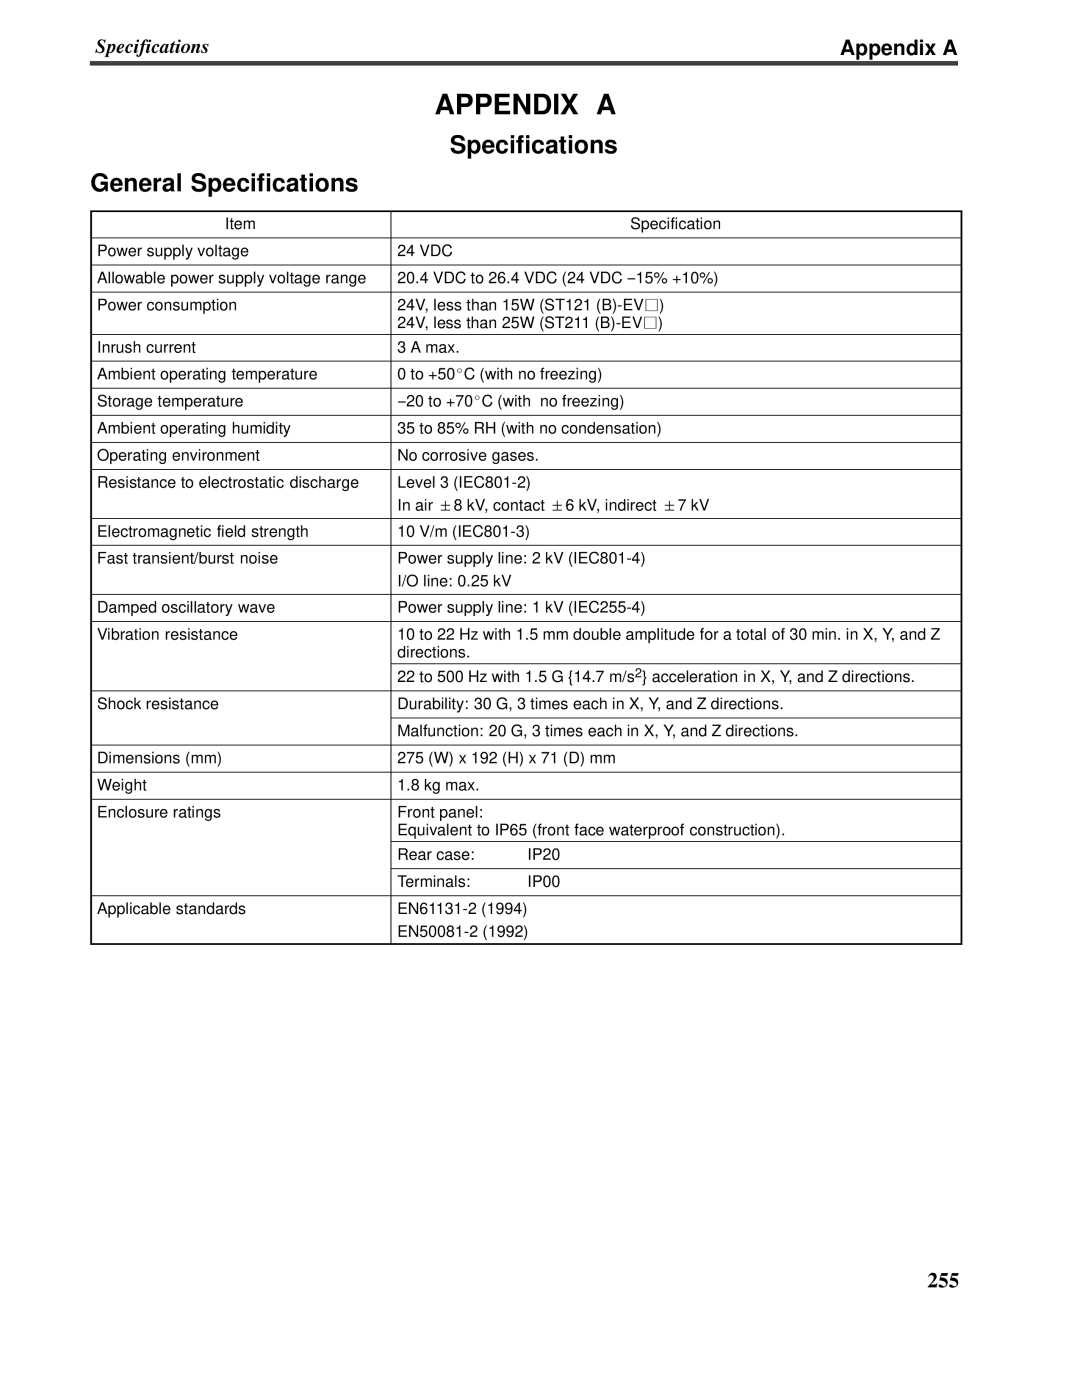 Omron V022-E3-1 operation manual Appendix A, General Specifications 